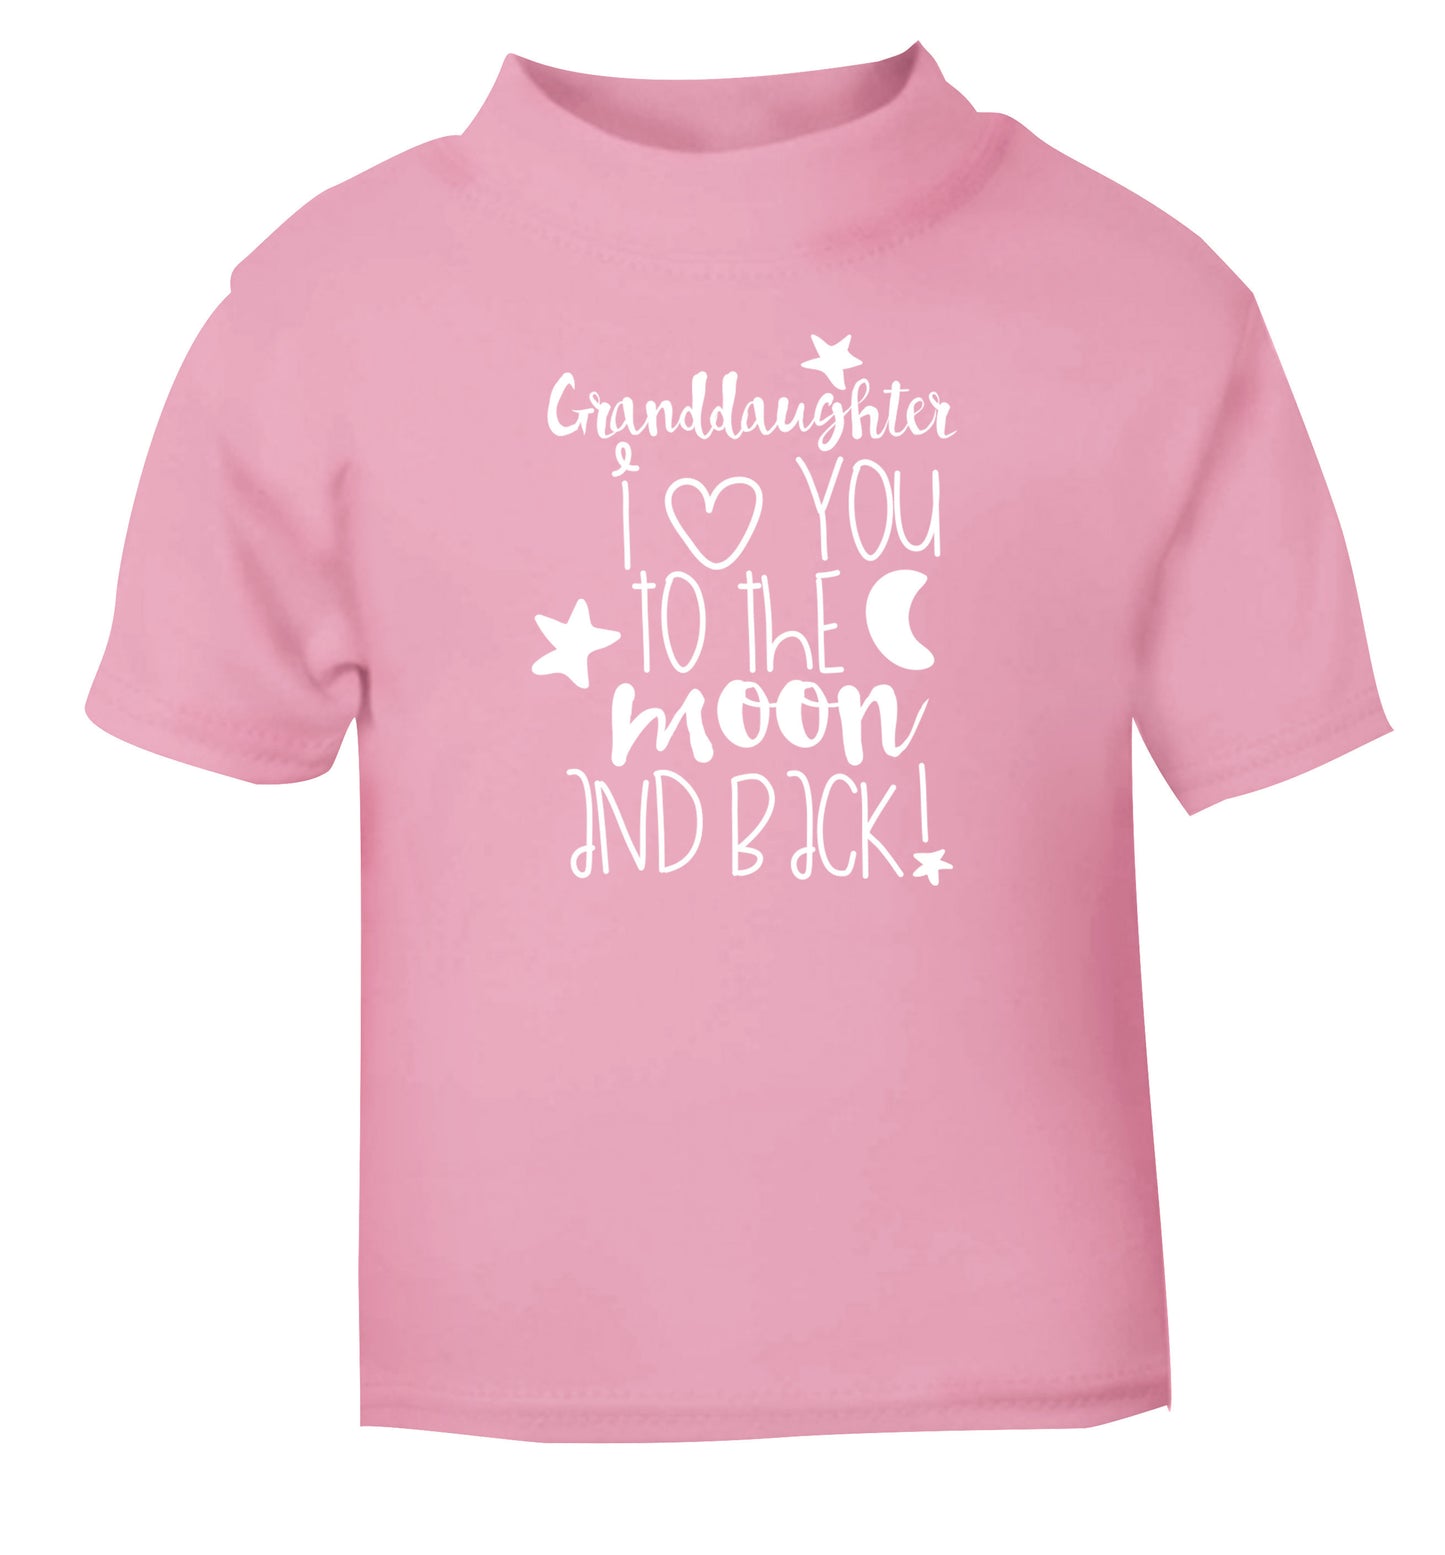 Granddaughter I love you to the moon and back light pink Baby Toddler Tshirt 2 Years